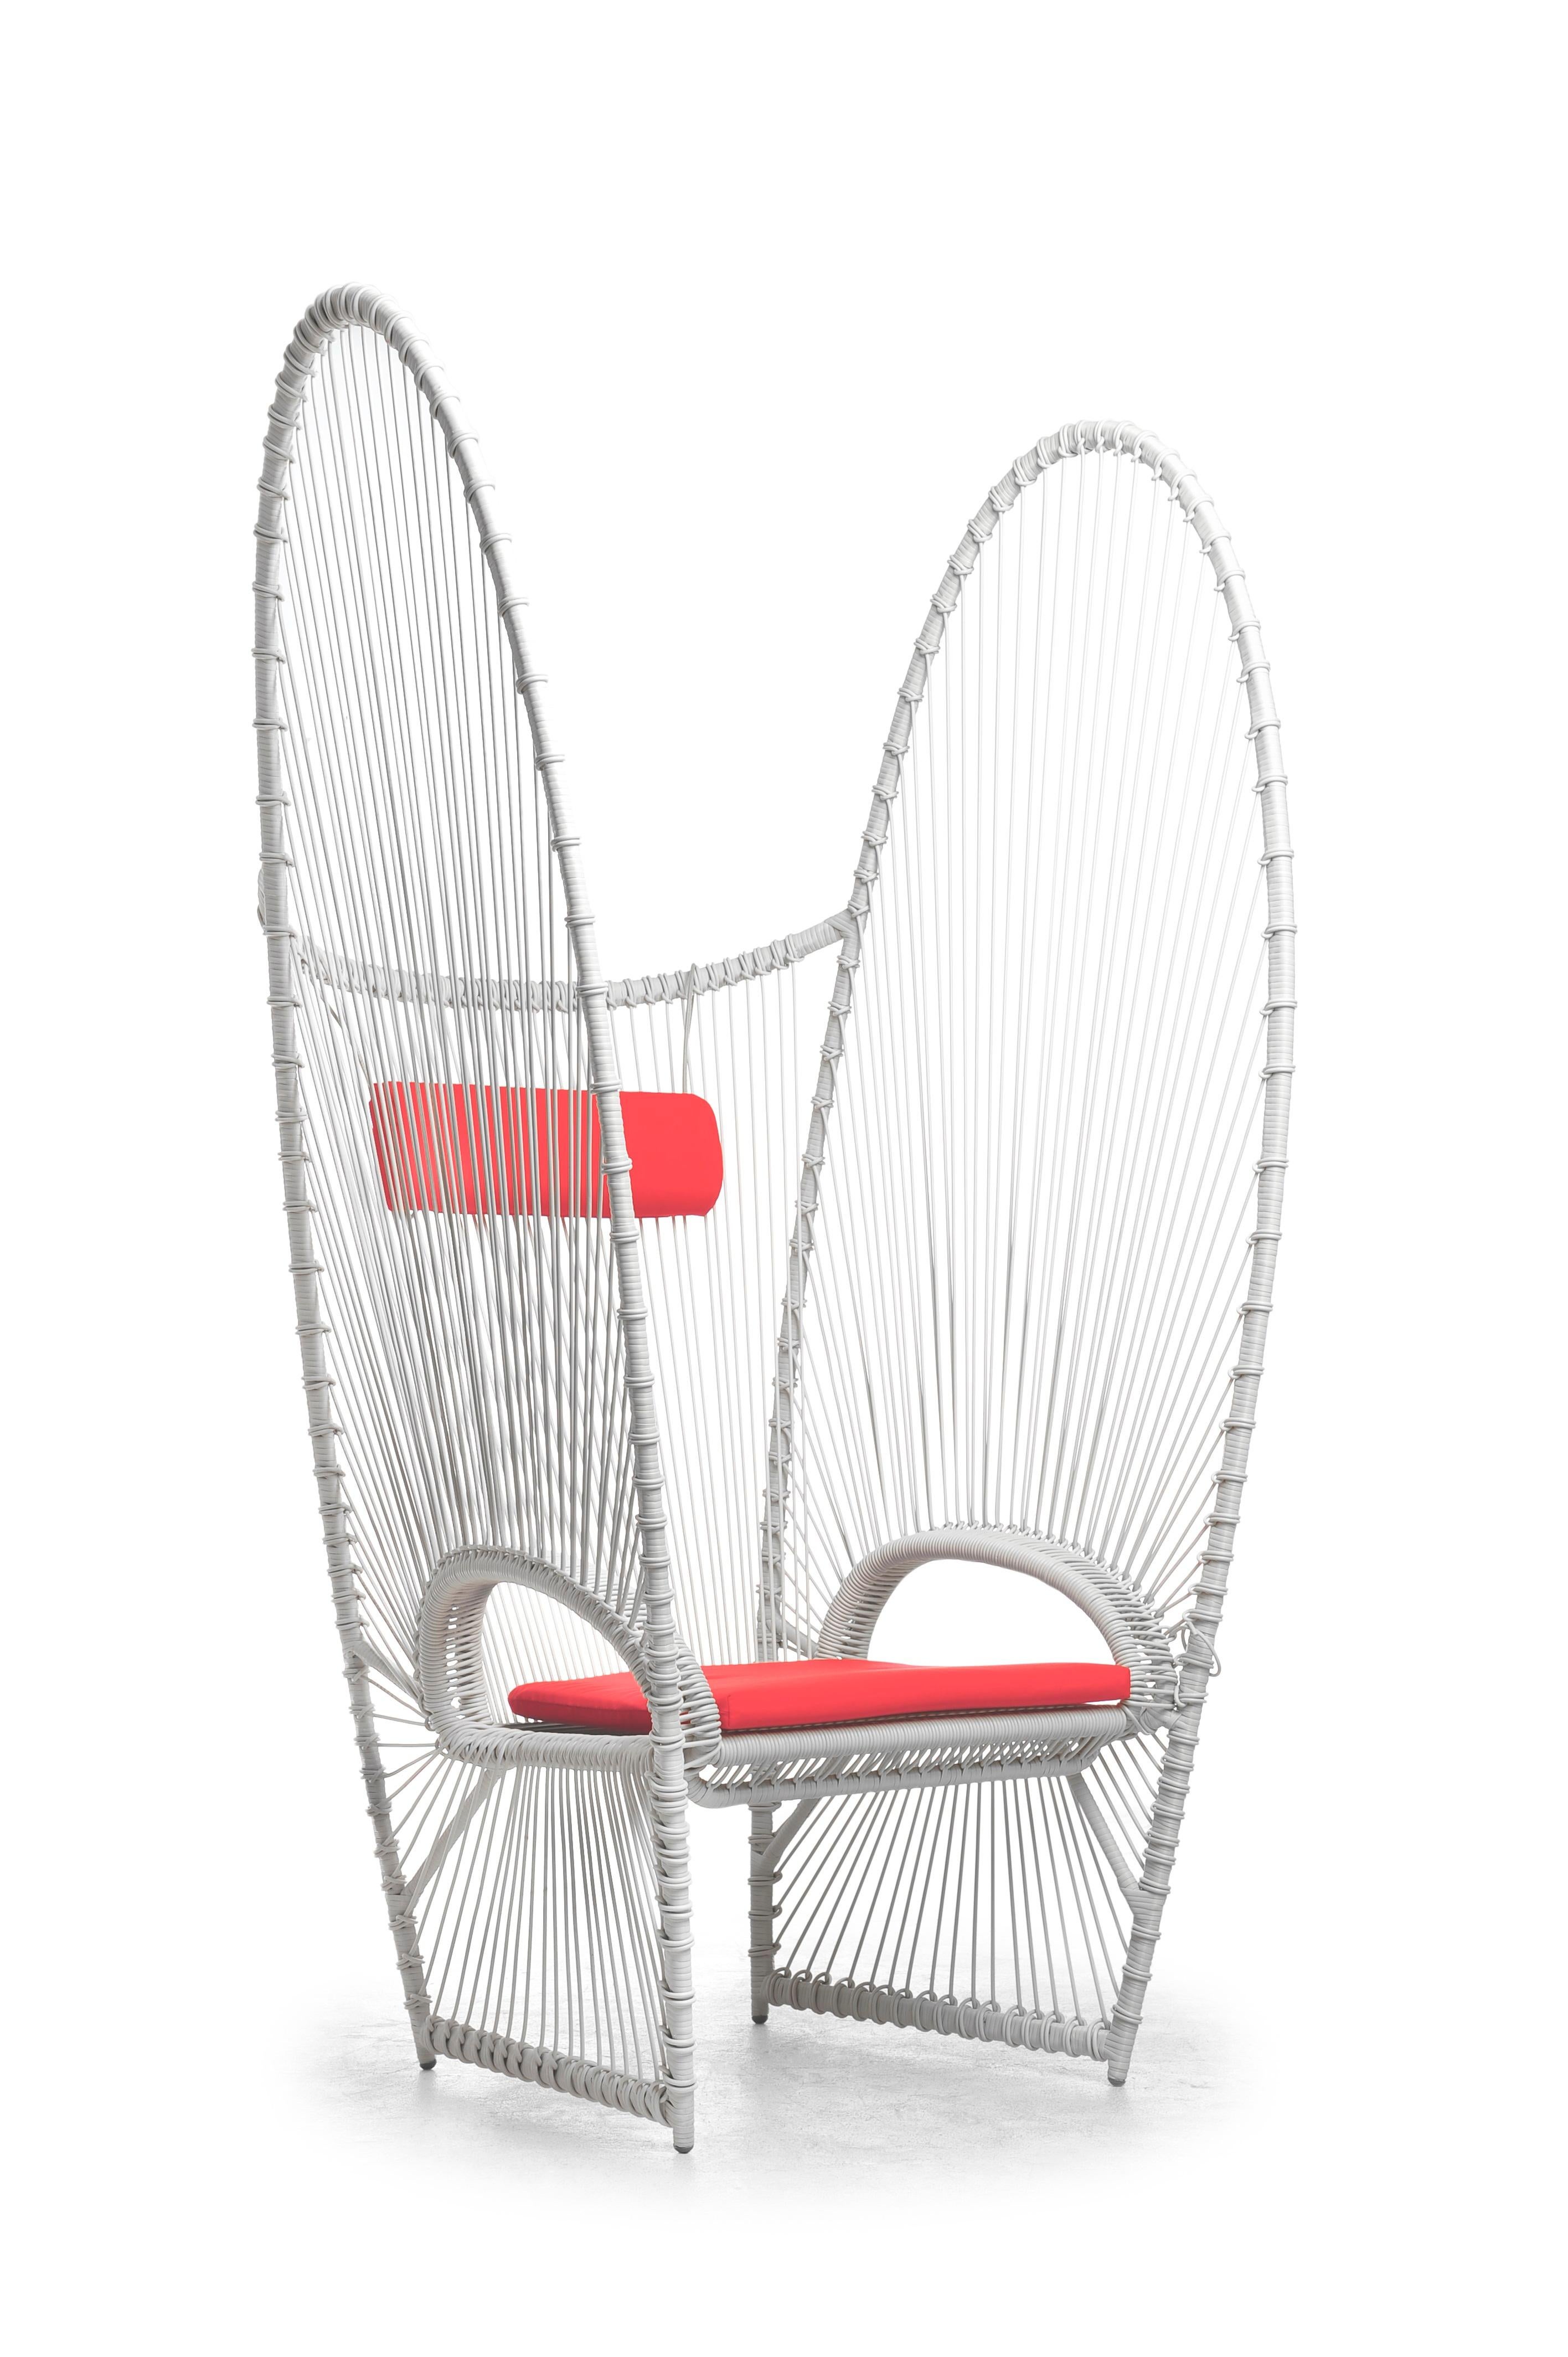 Papillon easy armchair by Kenneth Cobonpue.
Materials: polyethelene, steel.
Also available in other colors.
Dimensions: 91 cm x 108 cm x H 192 cm. 

The Papillon easy armchair and swing feature handwoven polyethylene on a frame that’s shaped to